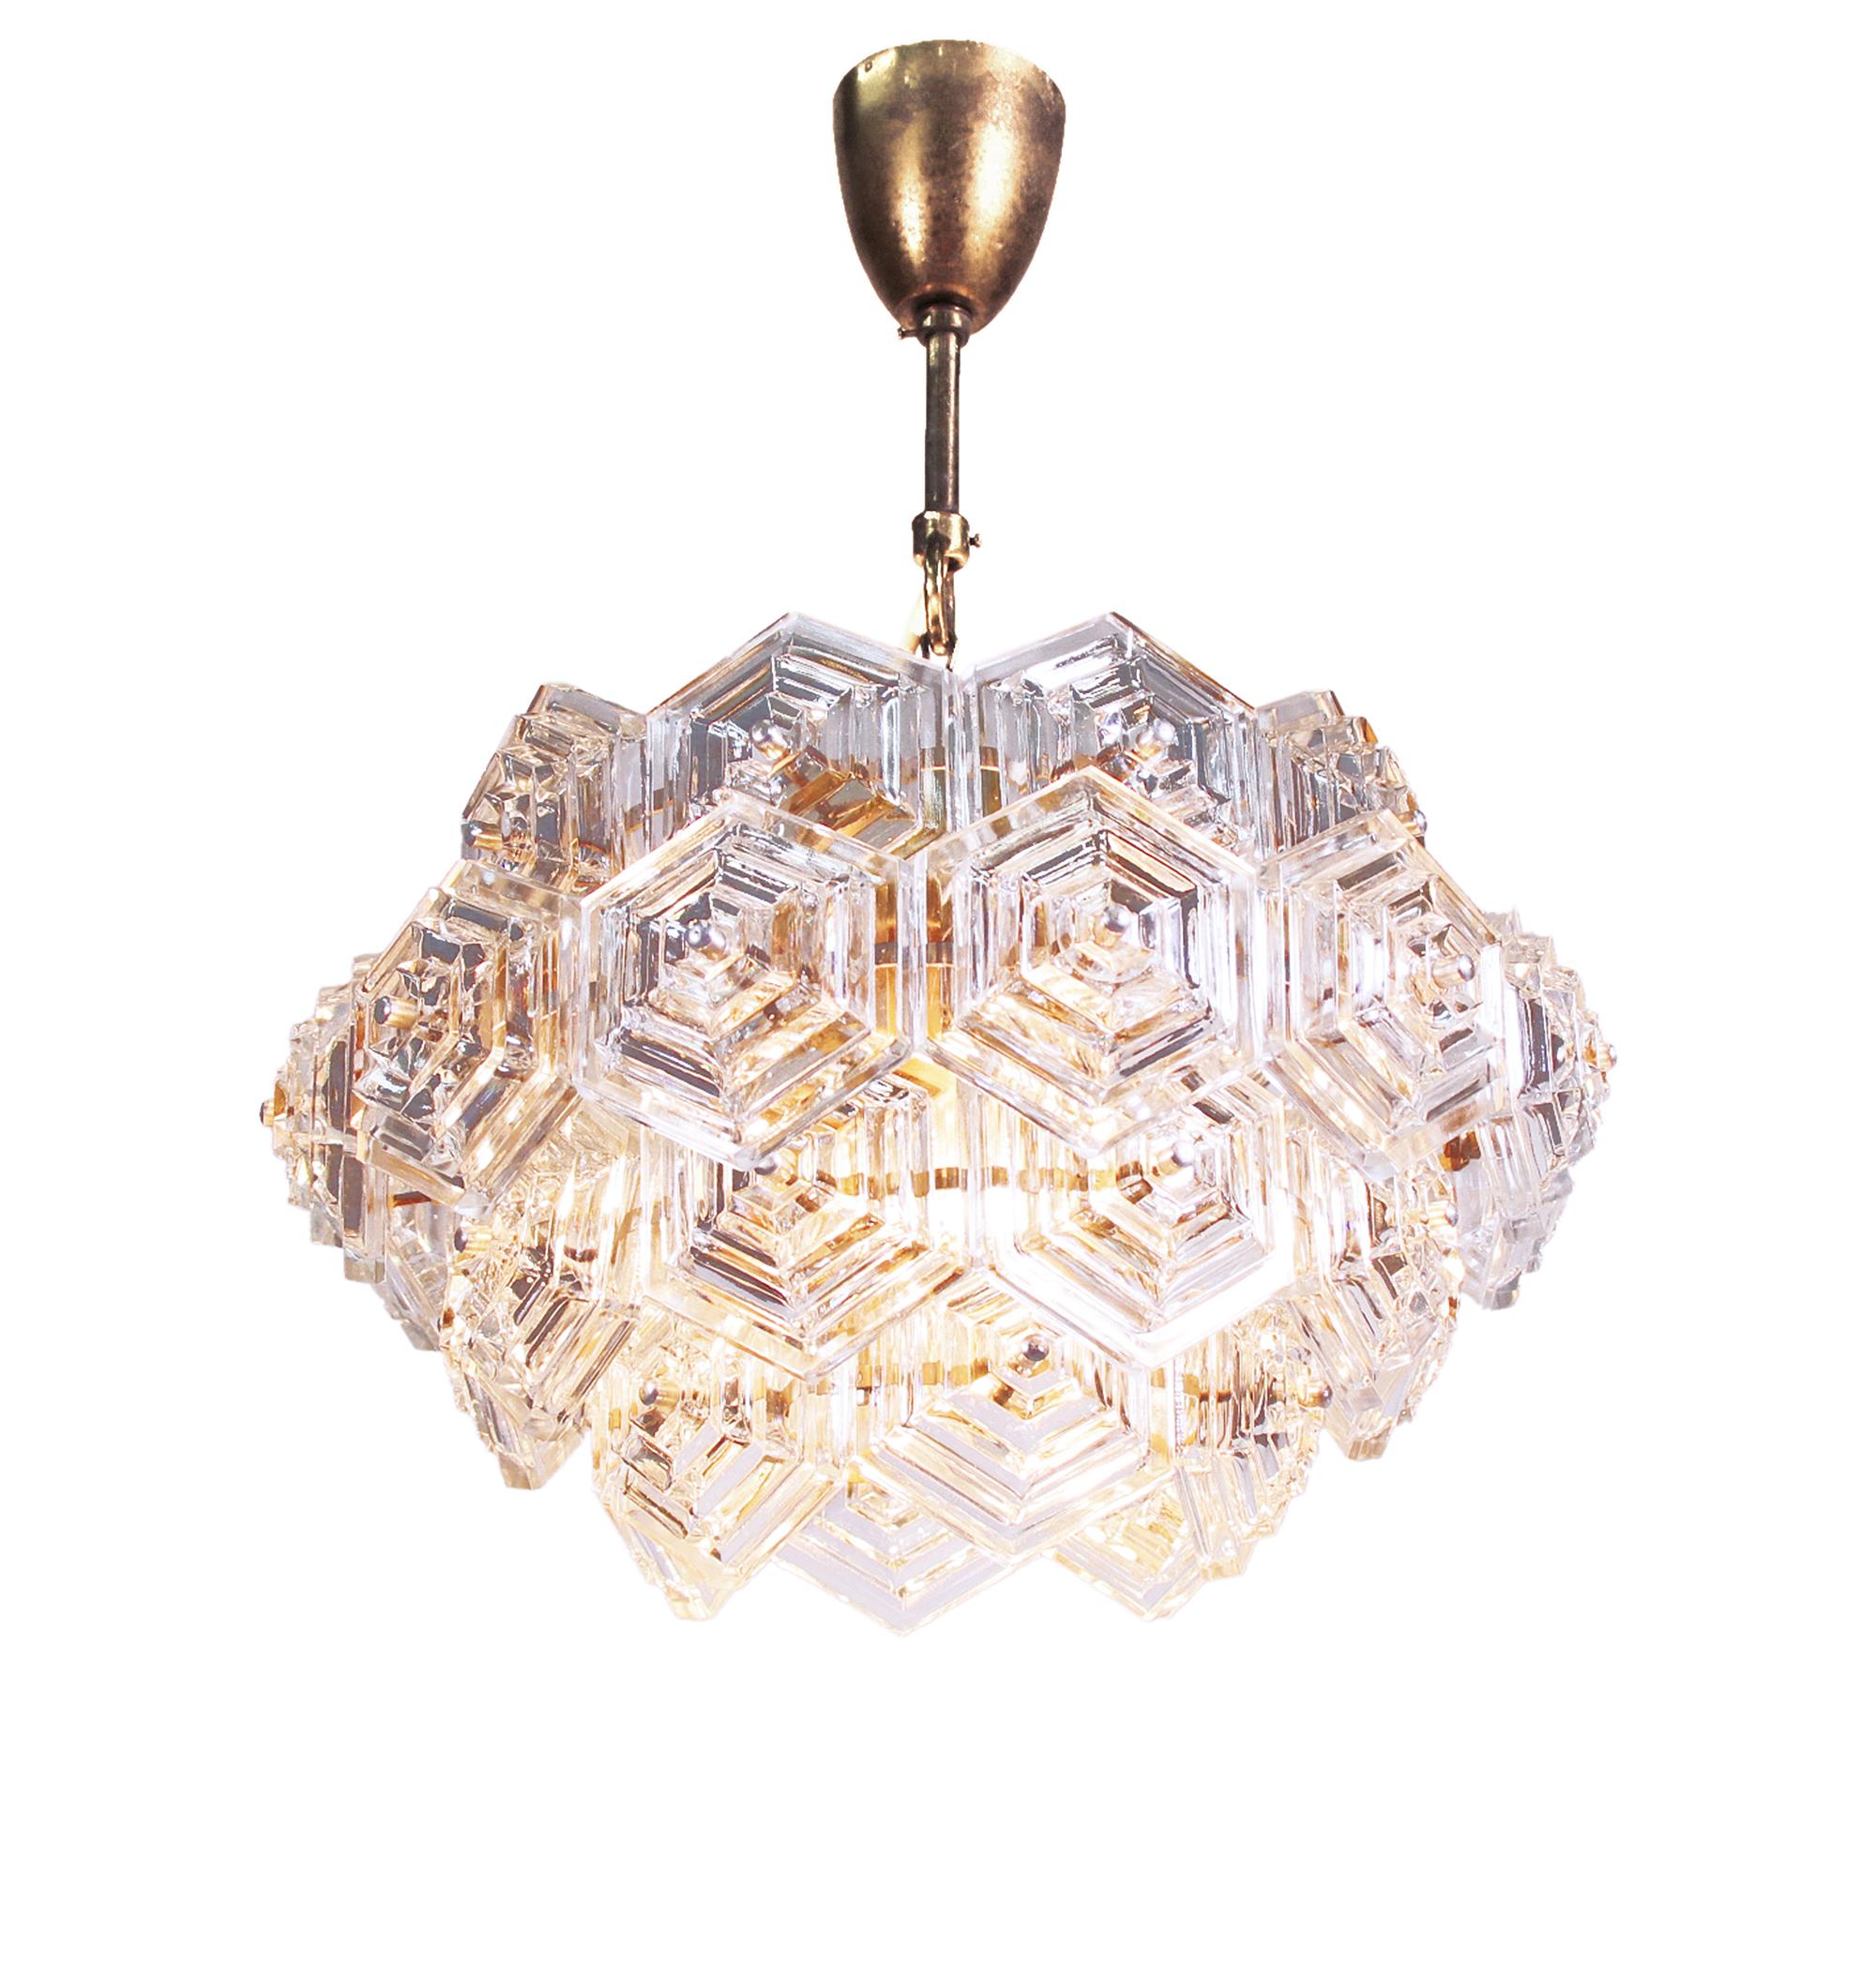 Dandelion chandelier with hexagonal glass prisms on a brass frame made by VEB Kristall Leuchten in the GDR in the 1960s. 

Lighting: The lamp takes three large Edison E27 base bulbs. 
Measures: dm 16.5 in. / 42 cm, height 10.2 in. / 26 cm,